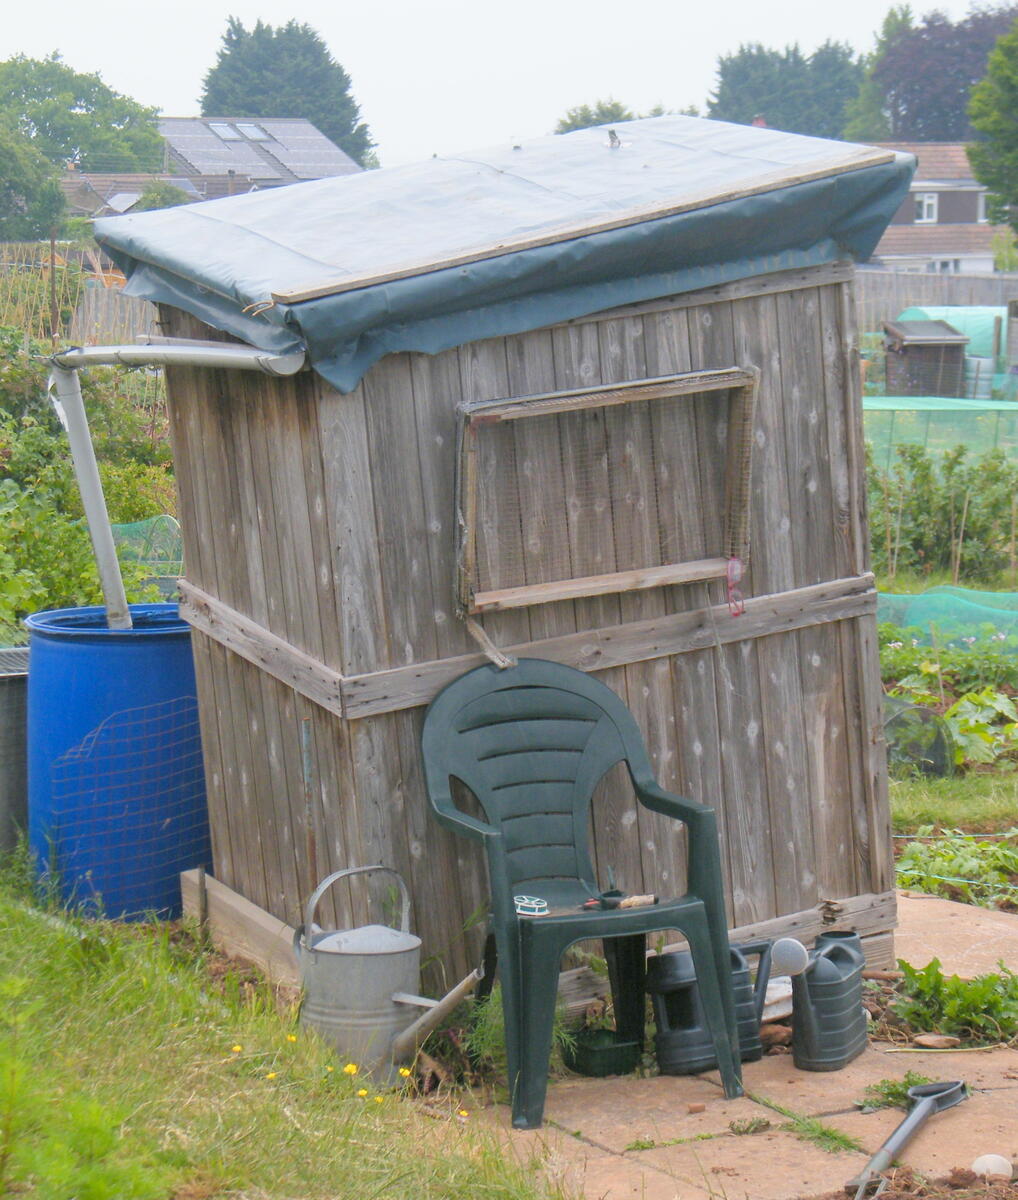 The leaning shed of Portishead